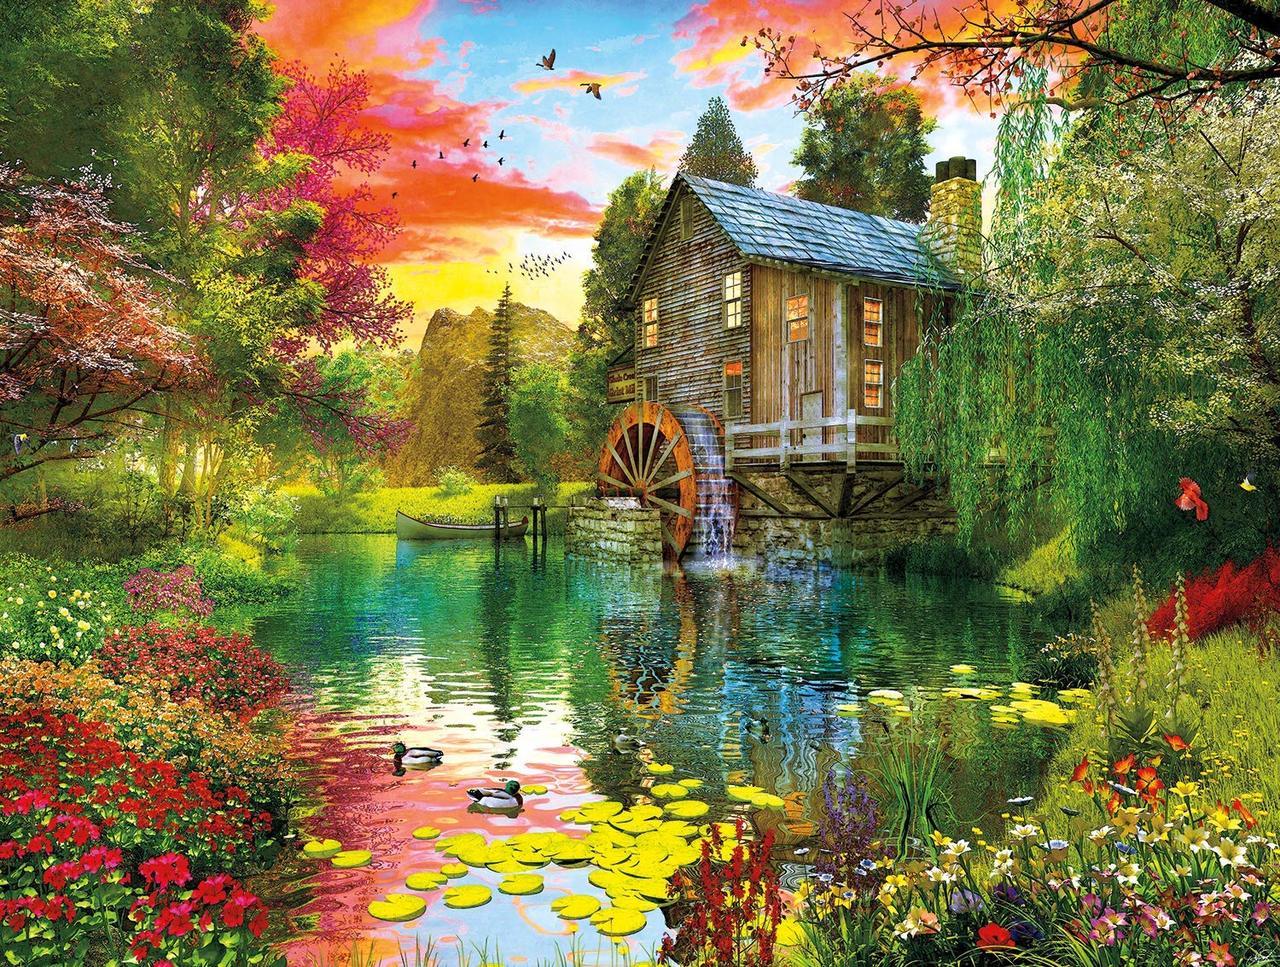 Sunset at the Mill - 750pc Jigsaw Puzzle by Buffalo Games